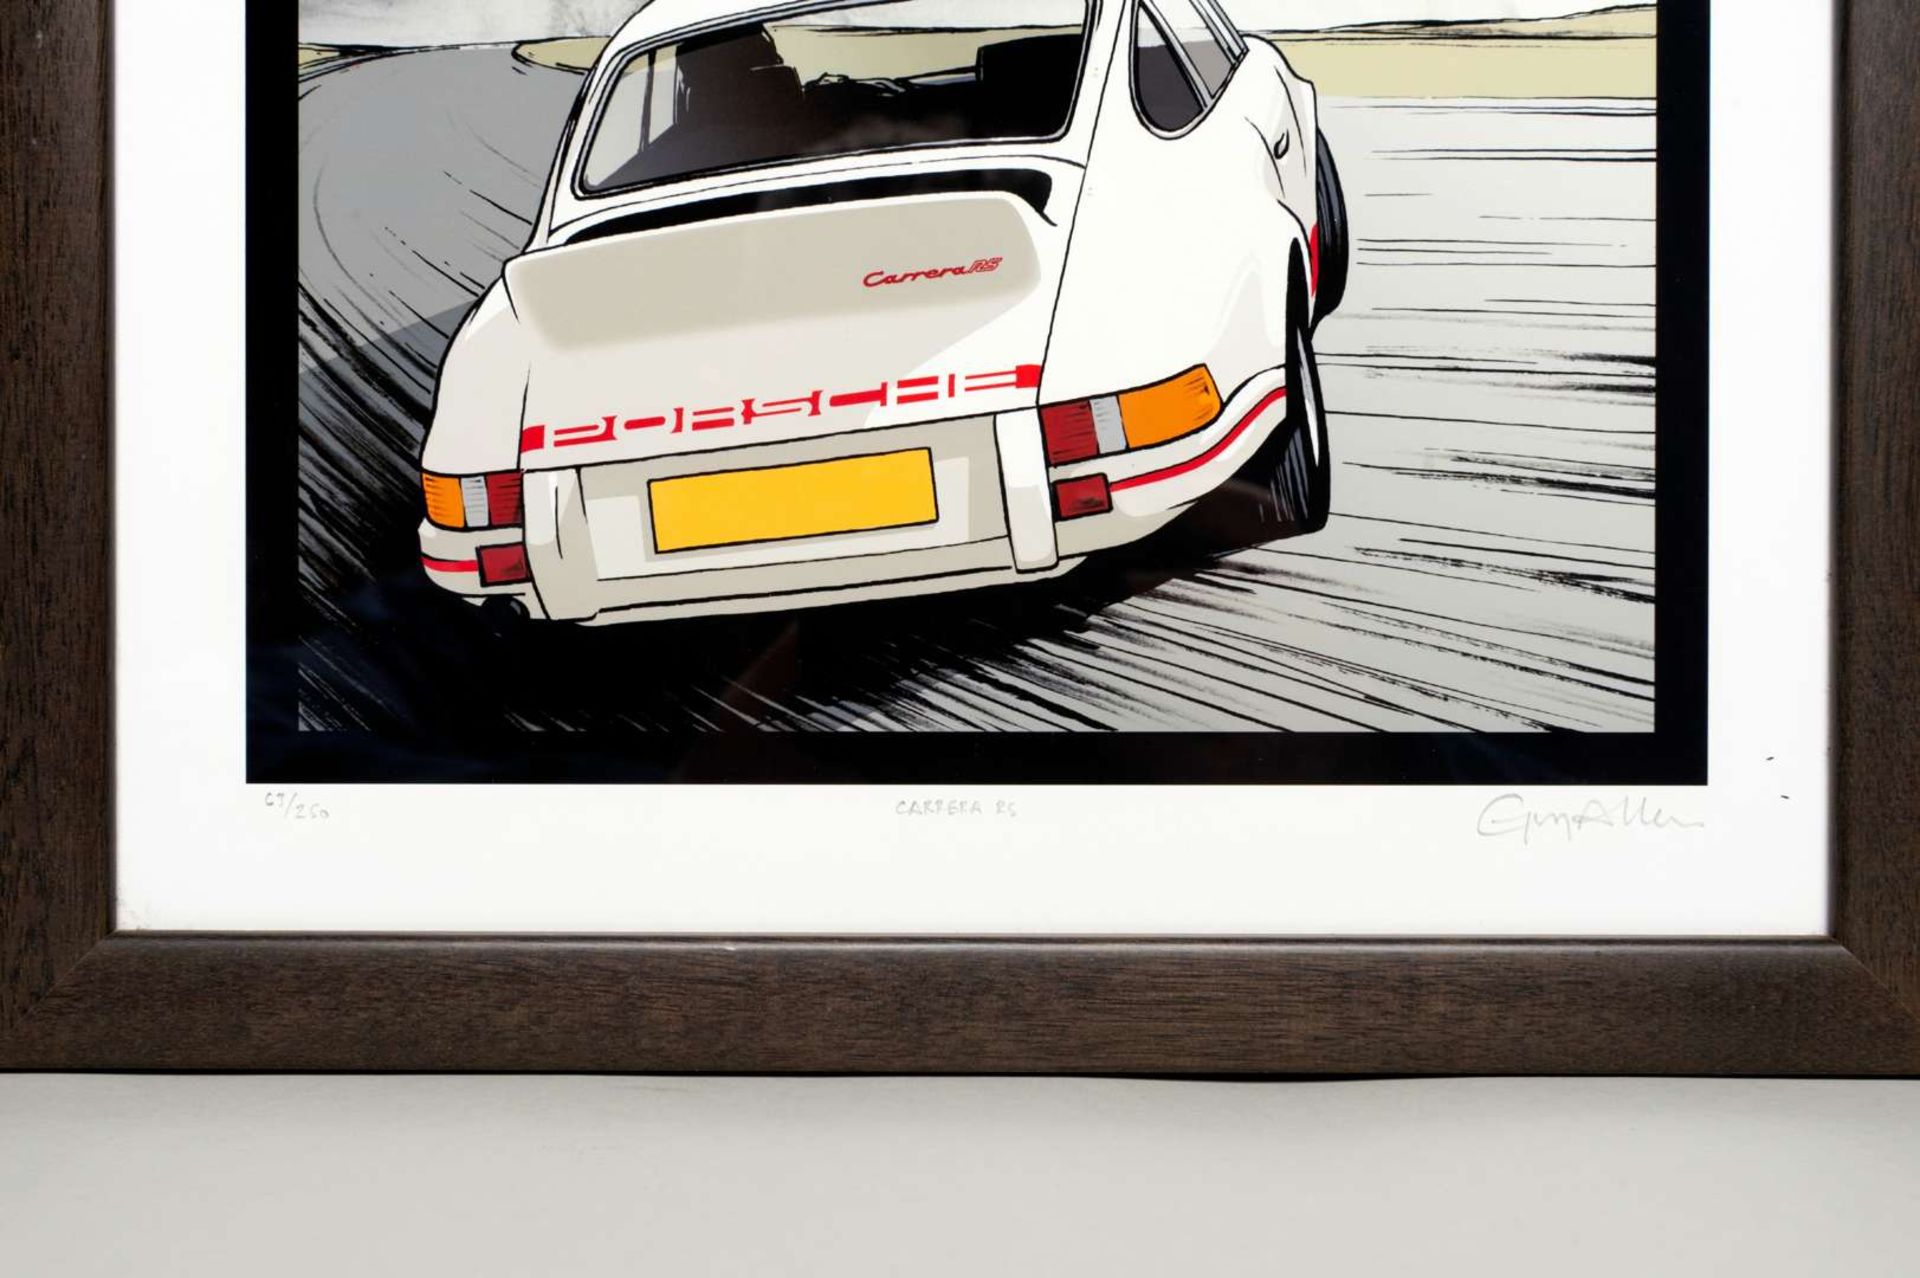 GUY ALLEN, 3 x limited edition prints, “Muira”, “Carrera RS", “BMW 2002 Turbo”, - Image 3 of 4